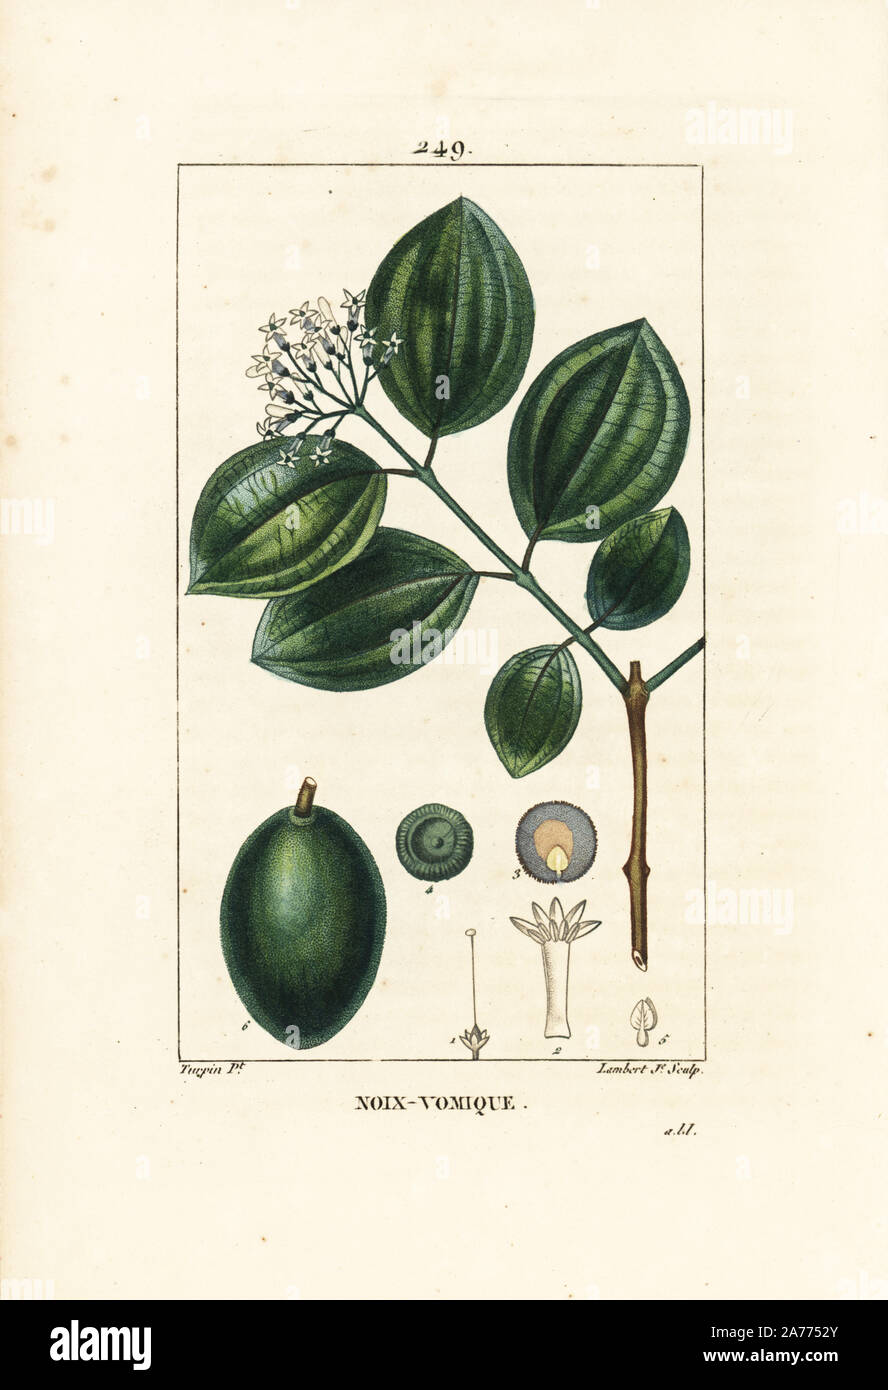 Strychnine tree or poison nut, Strychnos nux-vomica, with fruit, seed, leaf and flower. Handcoloured stipple copperplate engraving by Lambert Junior from a drawing by Pierre Jean-Francois Turpin from Chaumeton, Poiret and Chamberet's "La Flore Medicale," Paris, Panckoucke, 1830. Turpin (1775~1840) was one of the three giants of French botanical art of the era alongside Pierre Joseph Redoute and Pancrace Bessa. Stock Photo